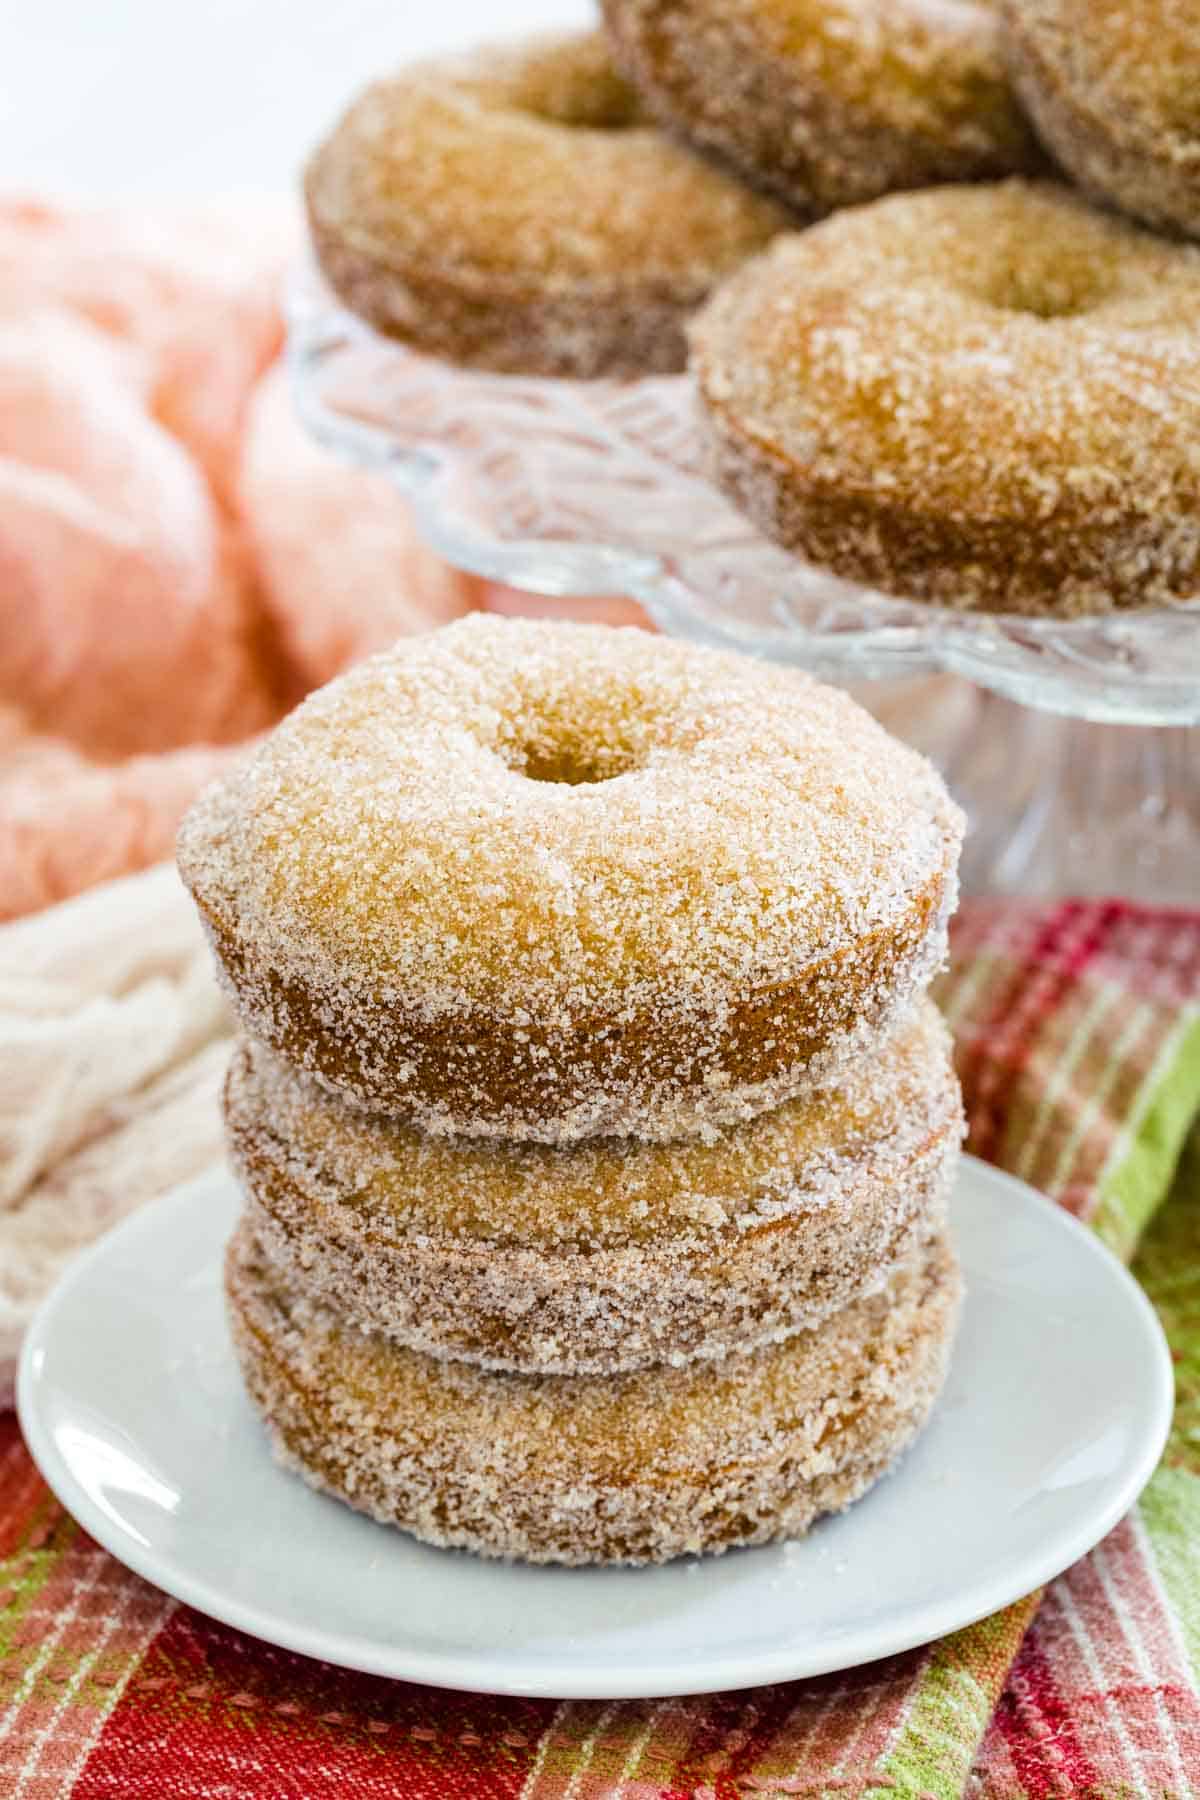 Three gluten free apple cider donuts stacked on a plate with more donuts on a cake stand in the background.